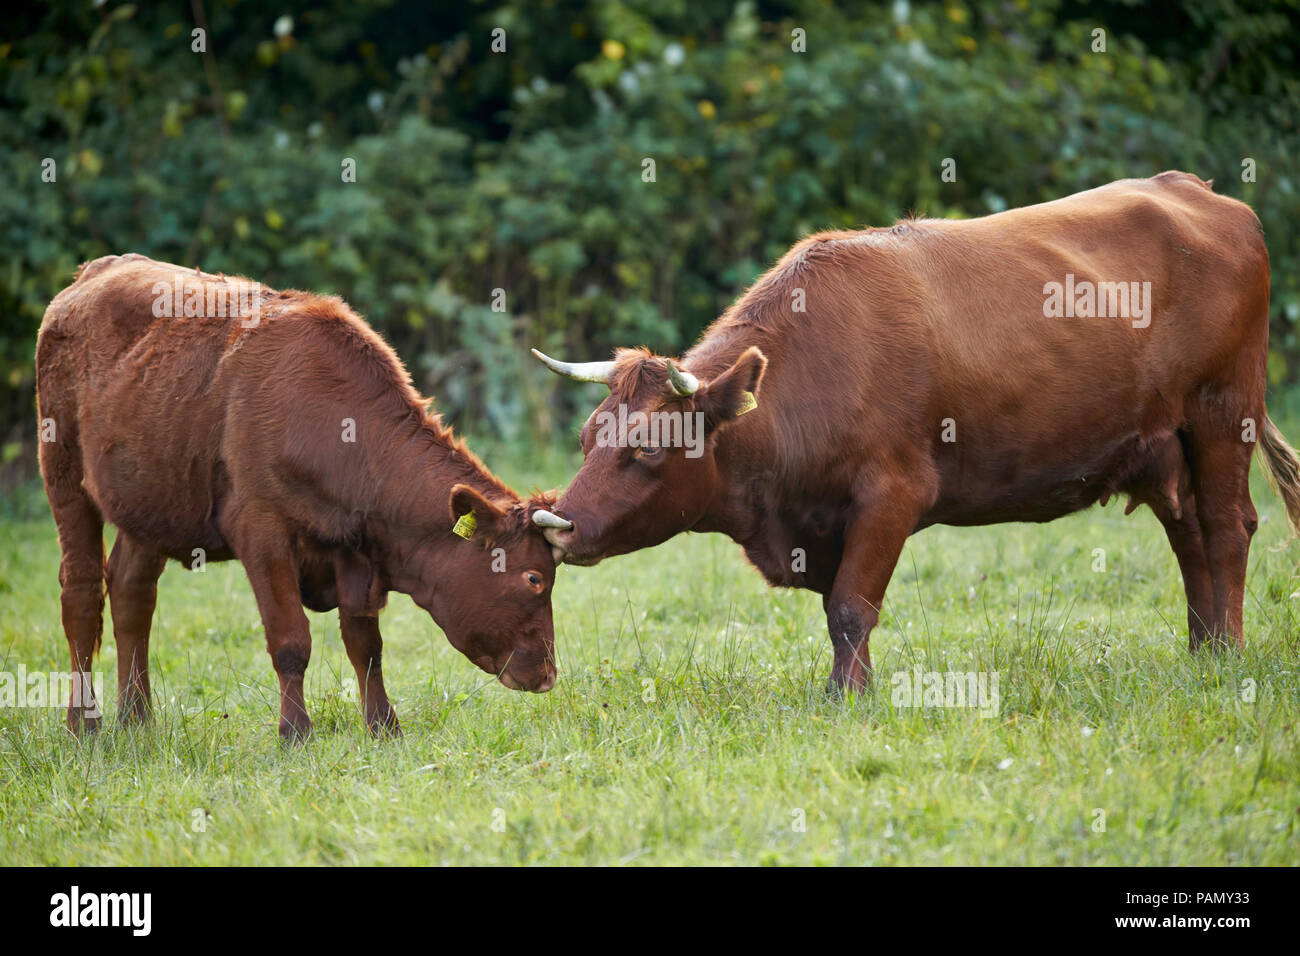 Glan Cattle. Cow sniffing at younger individual. Germany. Stock Photo